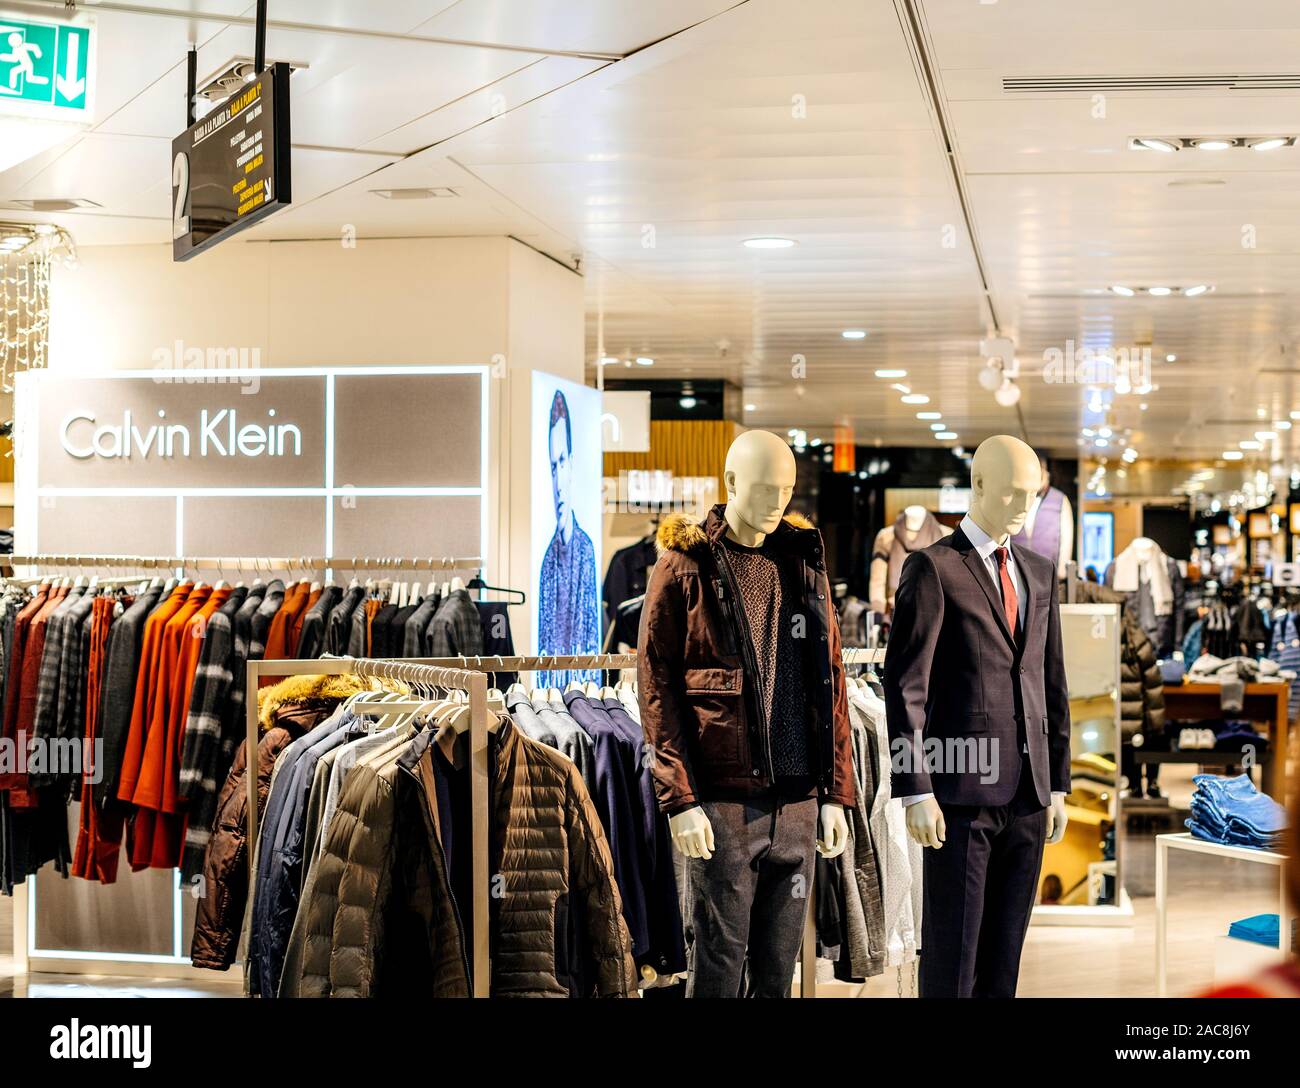 Barcelona, Spain - Nov 17, 2017: Front view of Two mannequins male silhouettes luxury silk jackets costumes in upscale fashion clothes store Calvin Klein in Corte Ingles Mall Stock Photo - Alamy